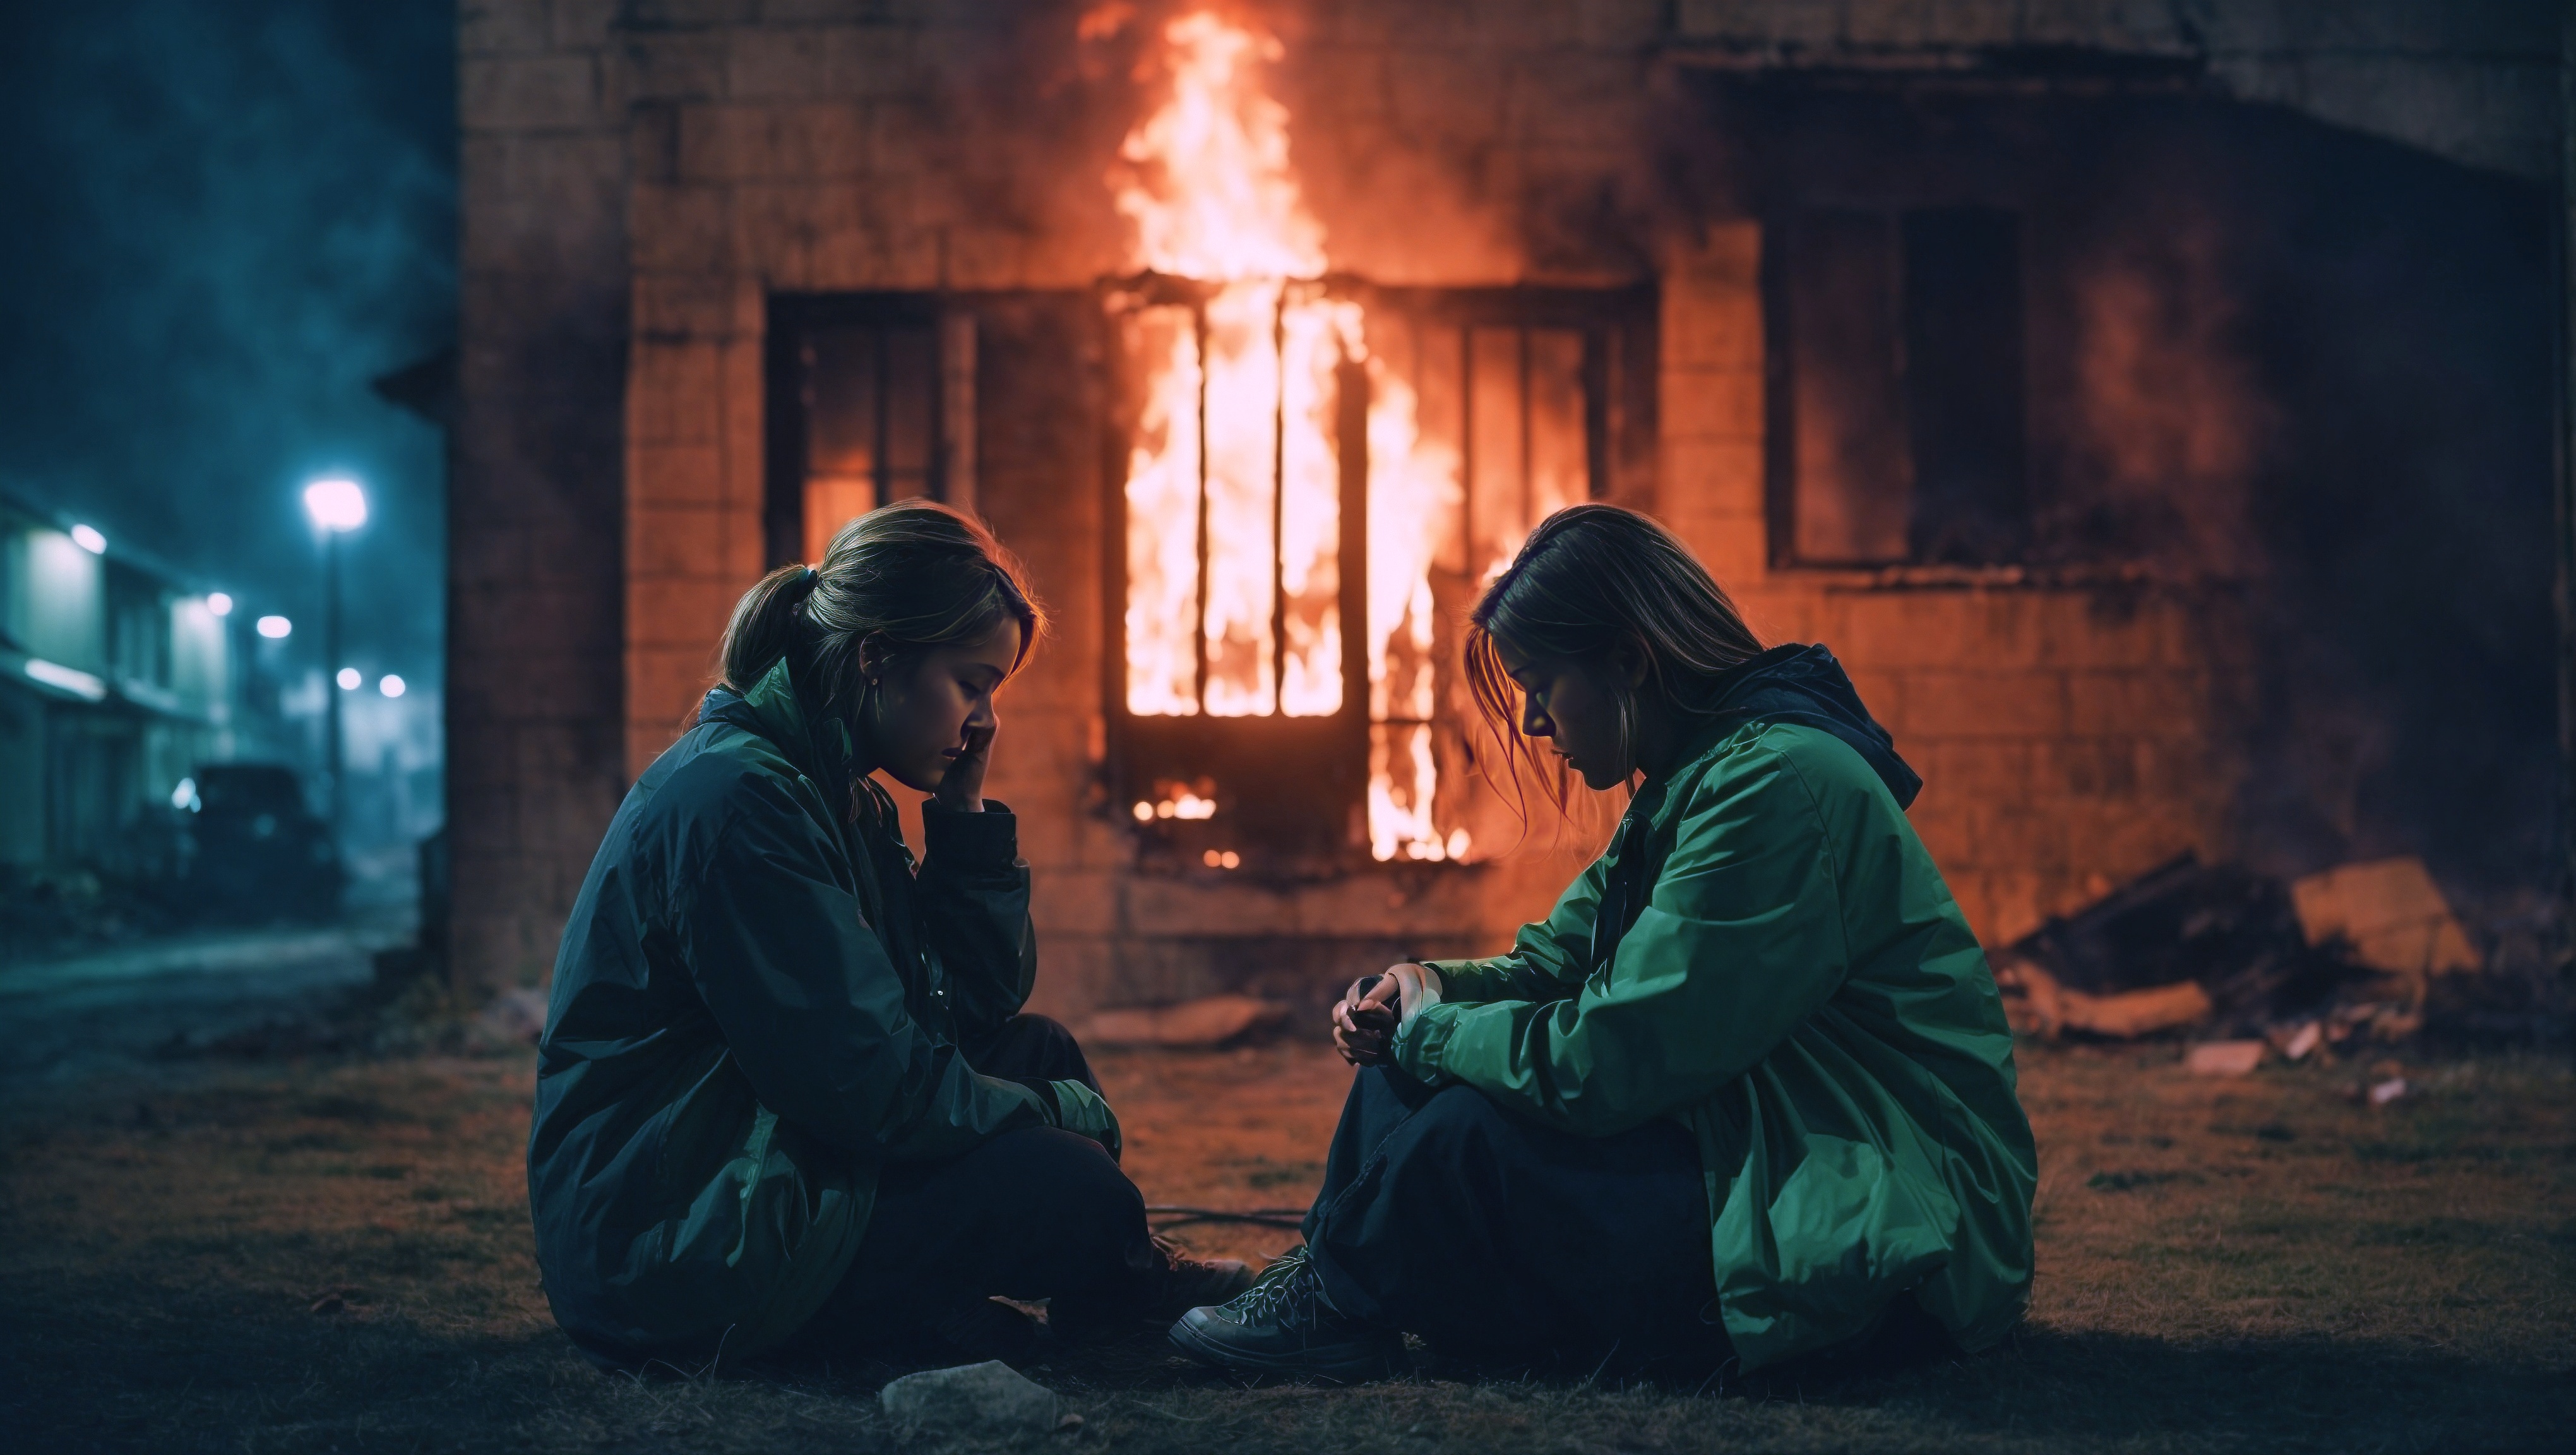 Free photo Two women sitting side by side in front of a building with fire